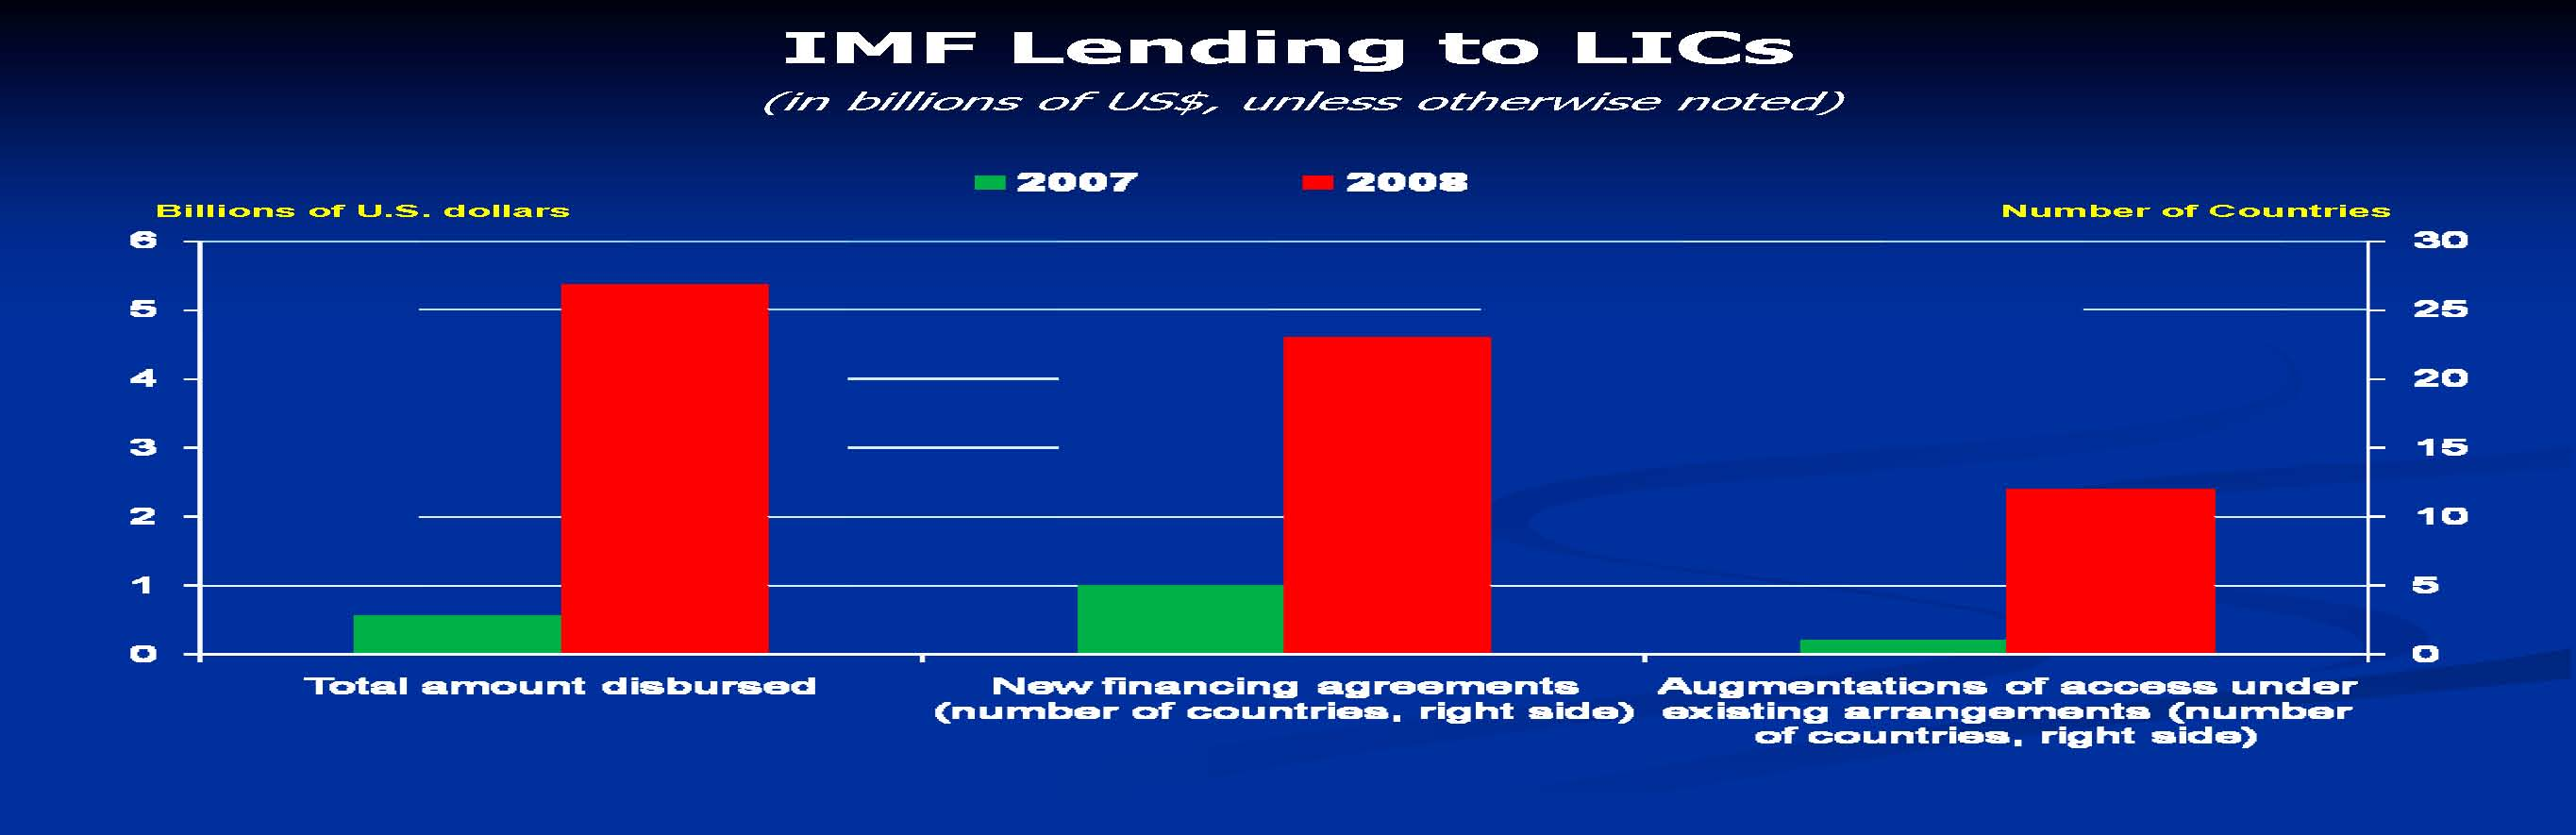 IMF lending to low-income countries